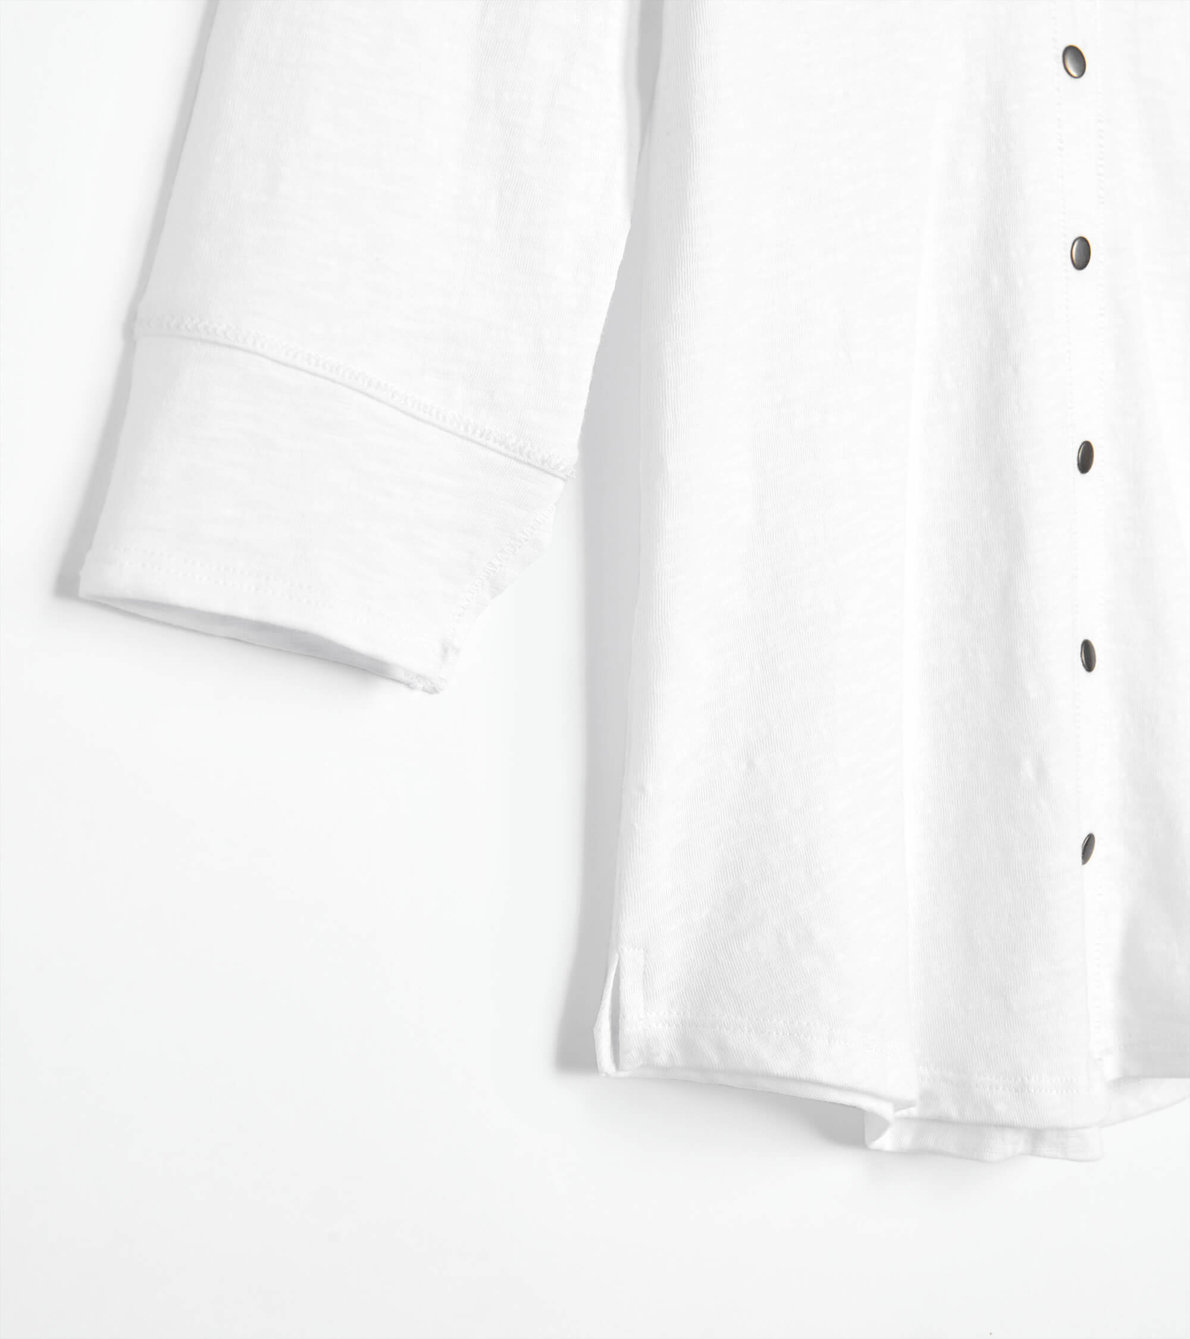 View larger image of V-Neck Top - White